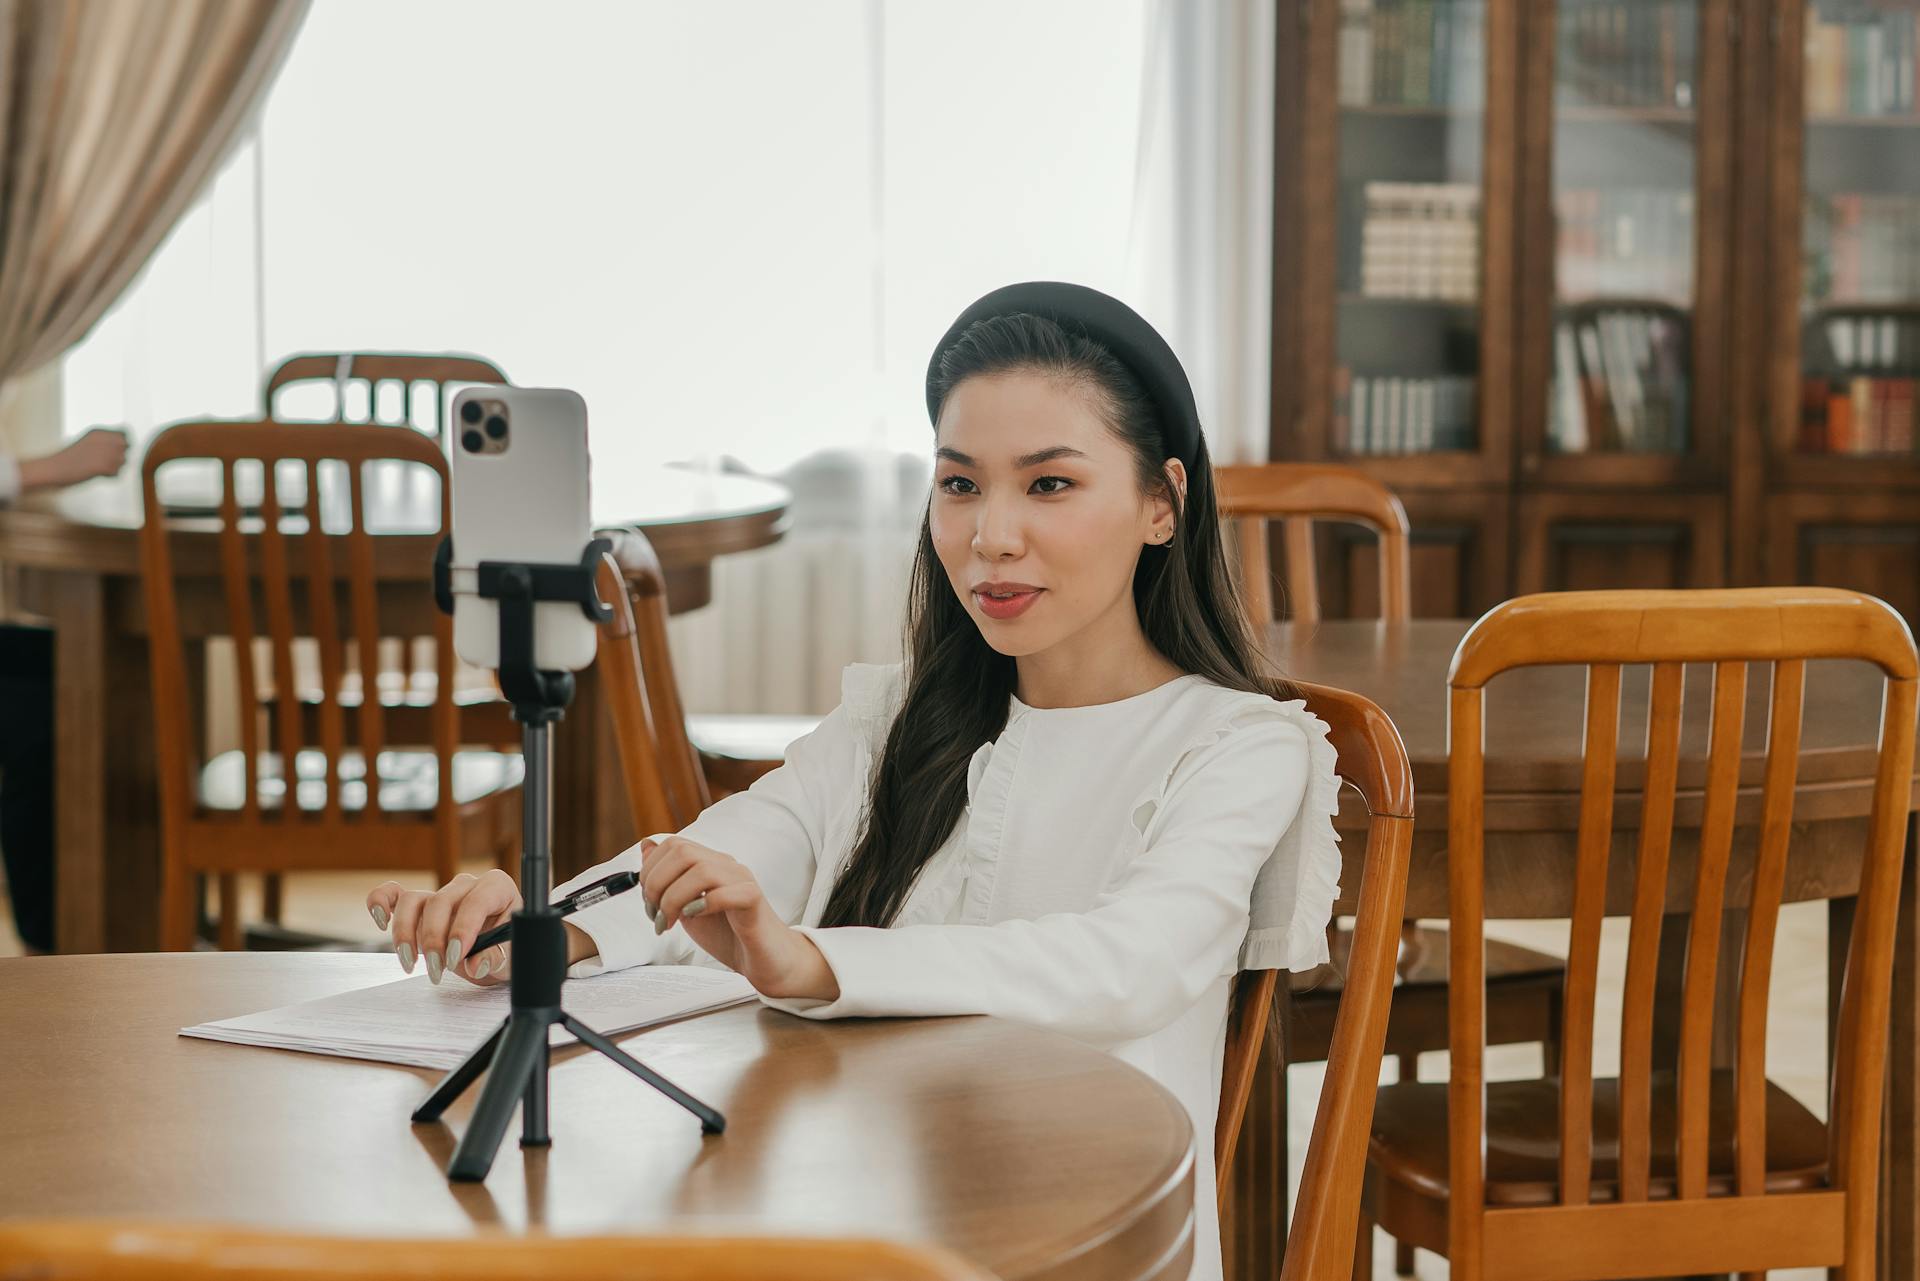 A Woman in White Long Sleeves Sitting on a Wooden Chair while Talking on the Phone